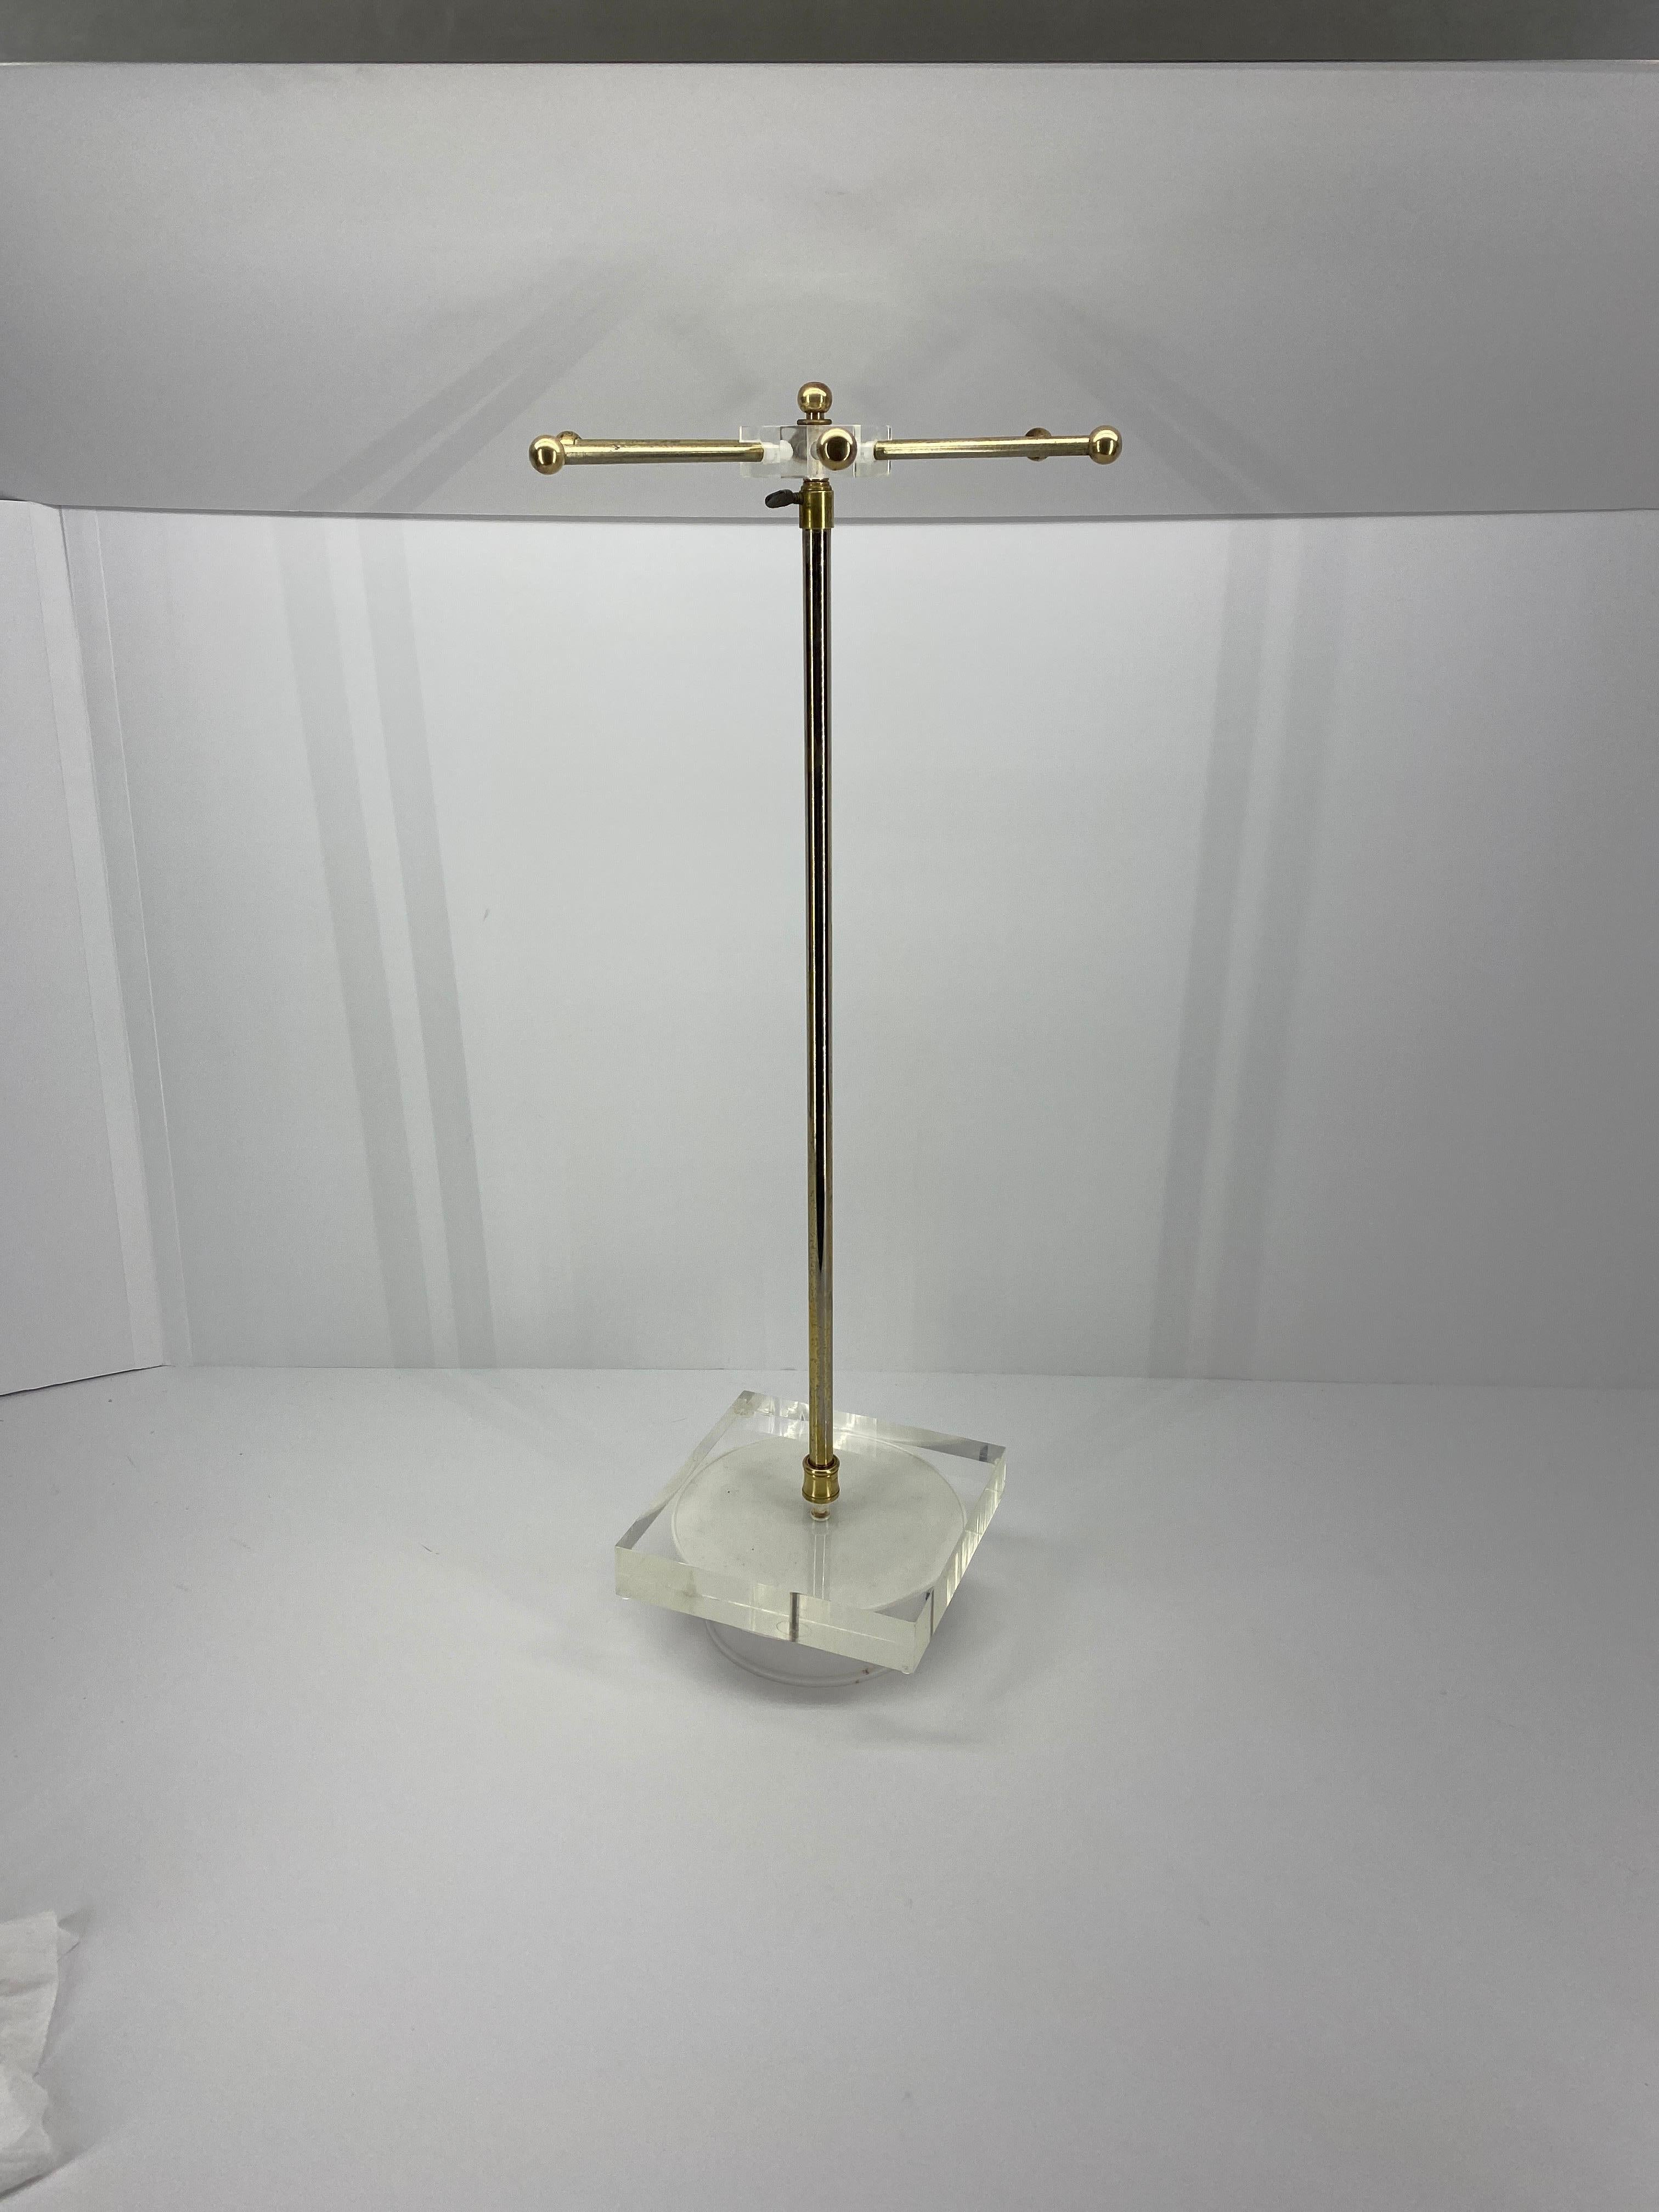 Mid-Century Modern Lucite and Brass Tie And Jewelry Stand For Sale 7